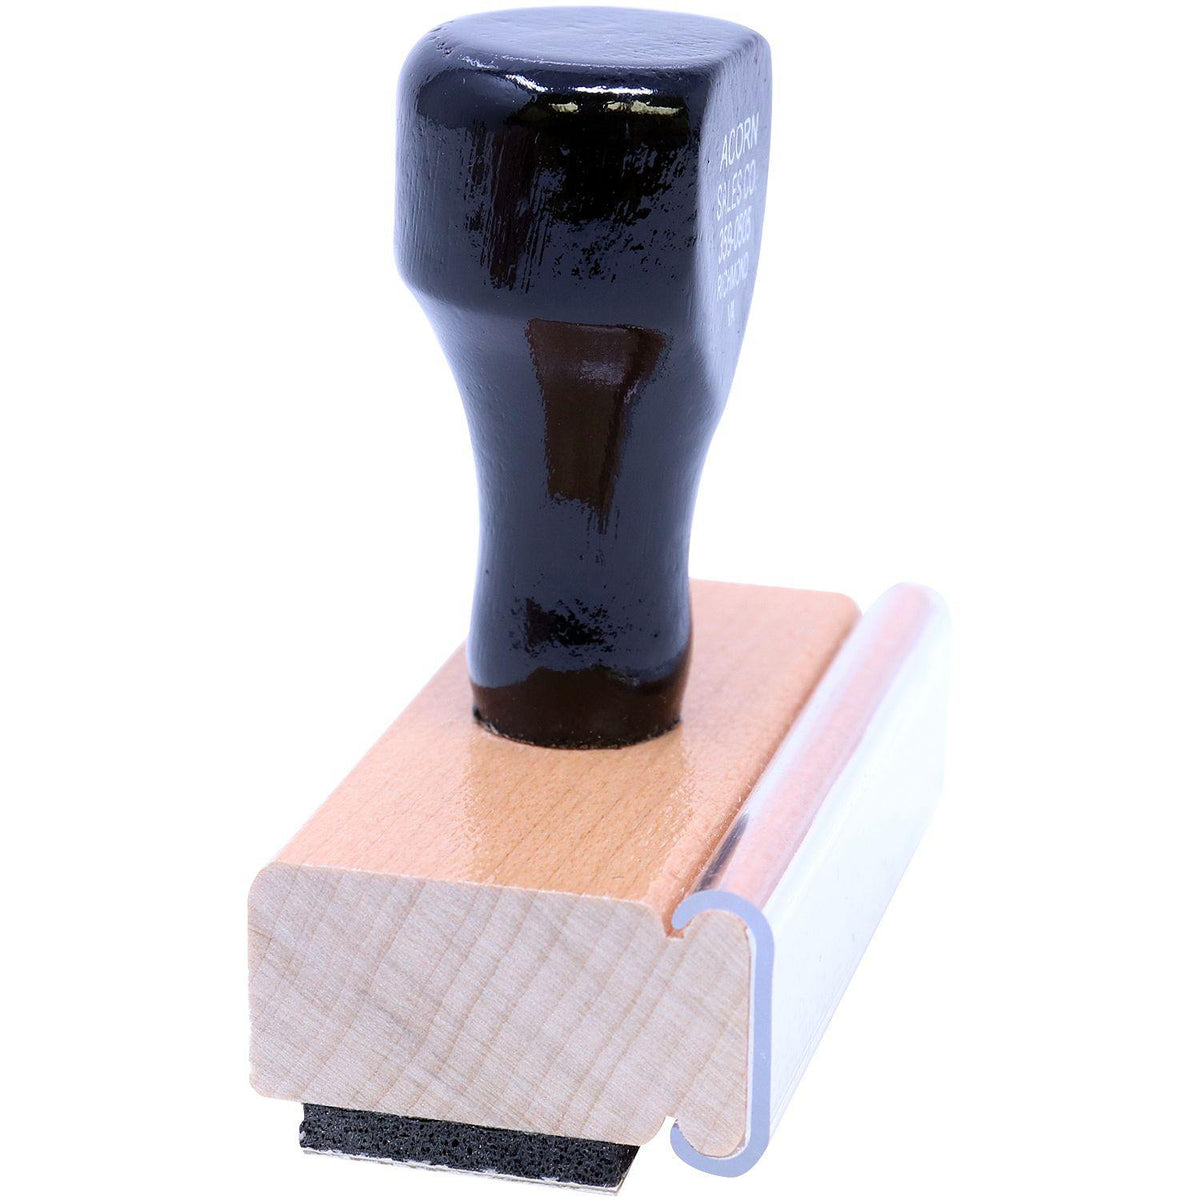 Side View of Extra Credit Rubber Stamp at an Angle